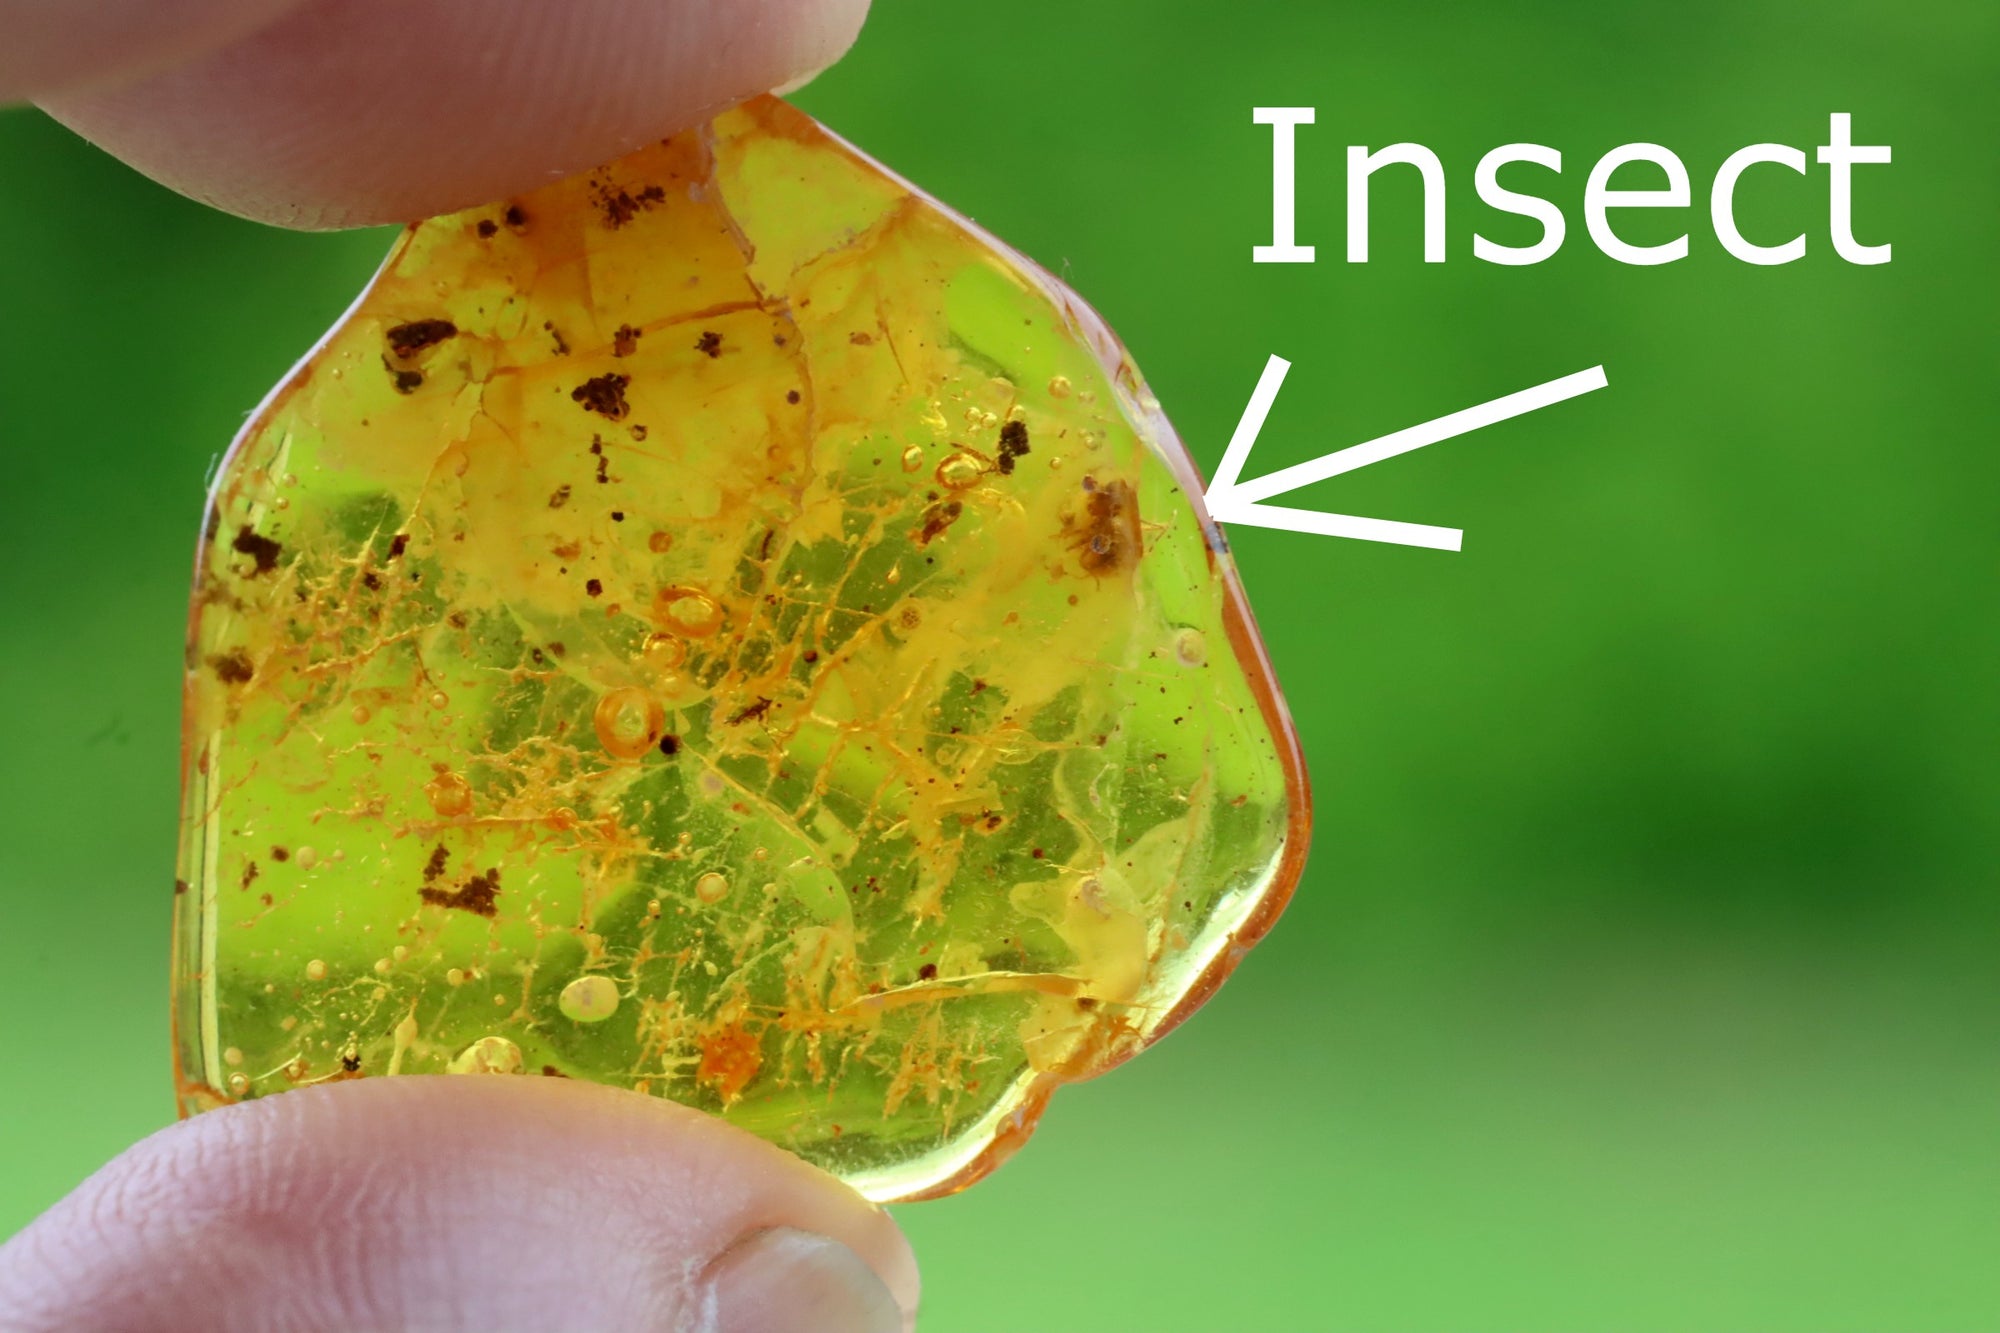 Special Offer  All 3 Insect Inclusions included Pieces in the Price